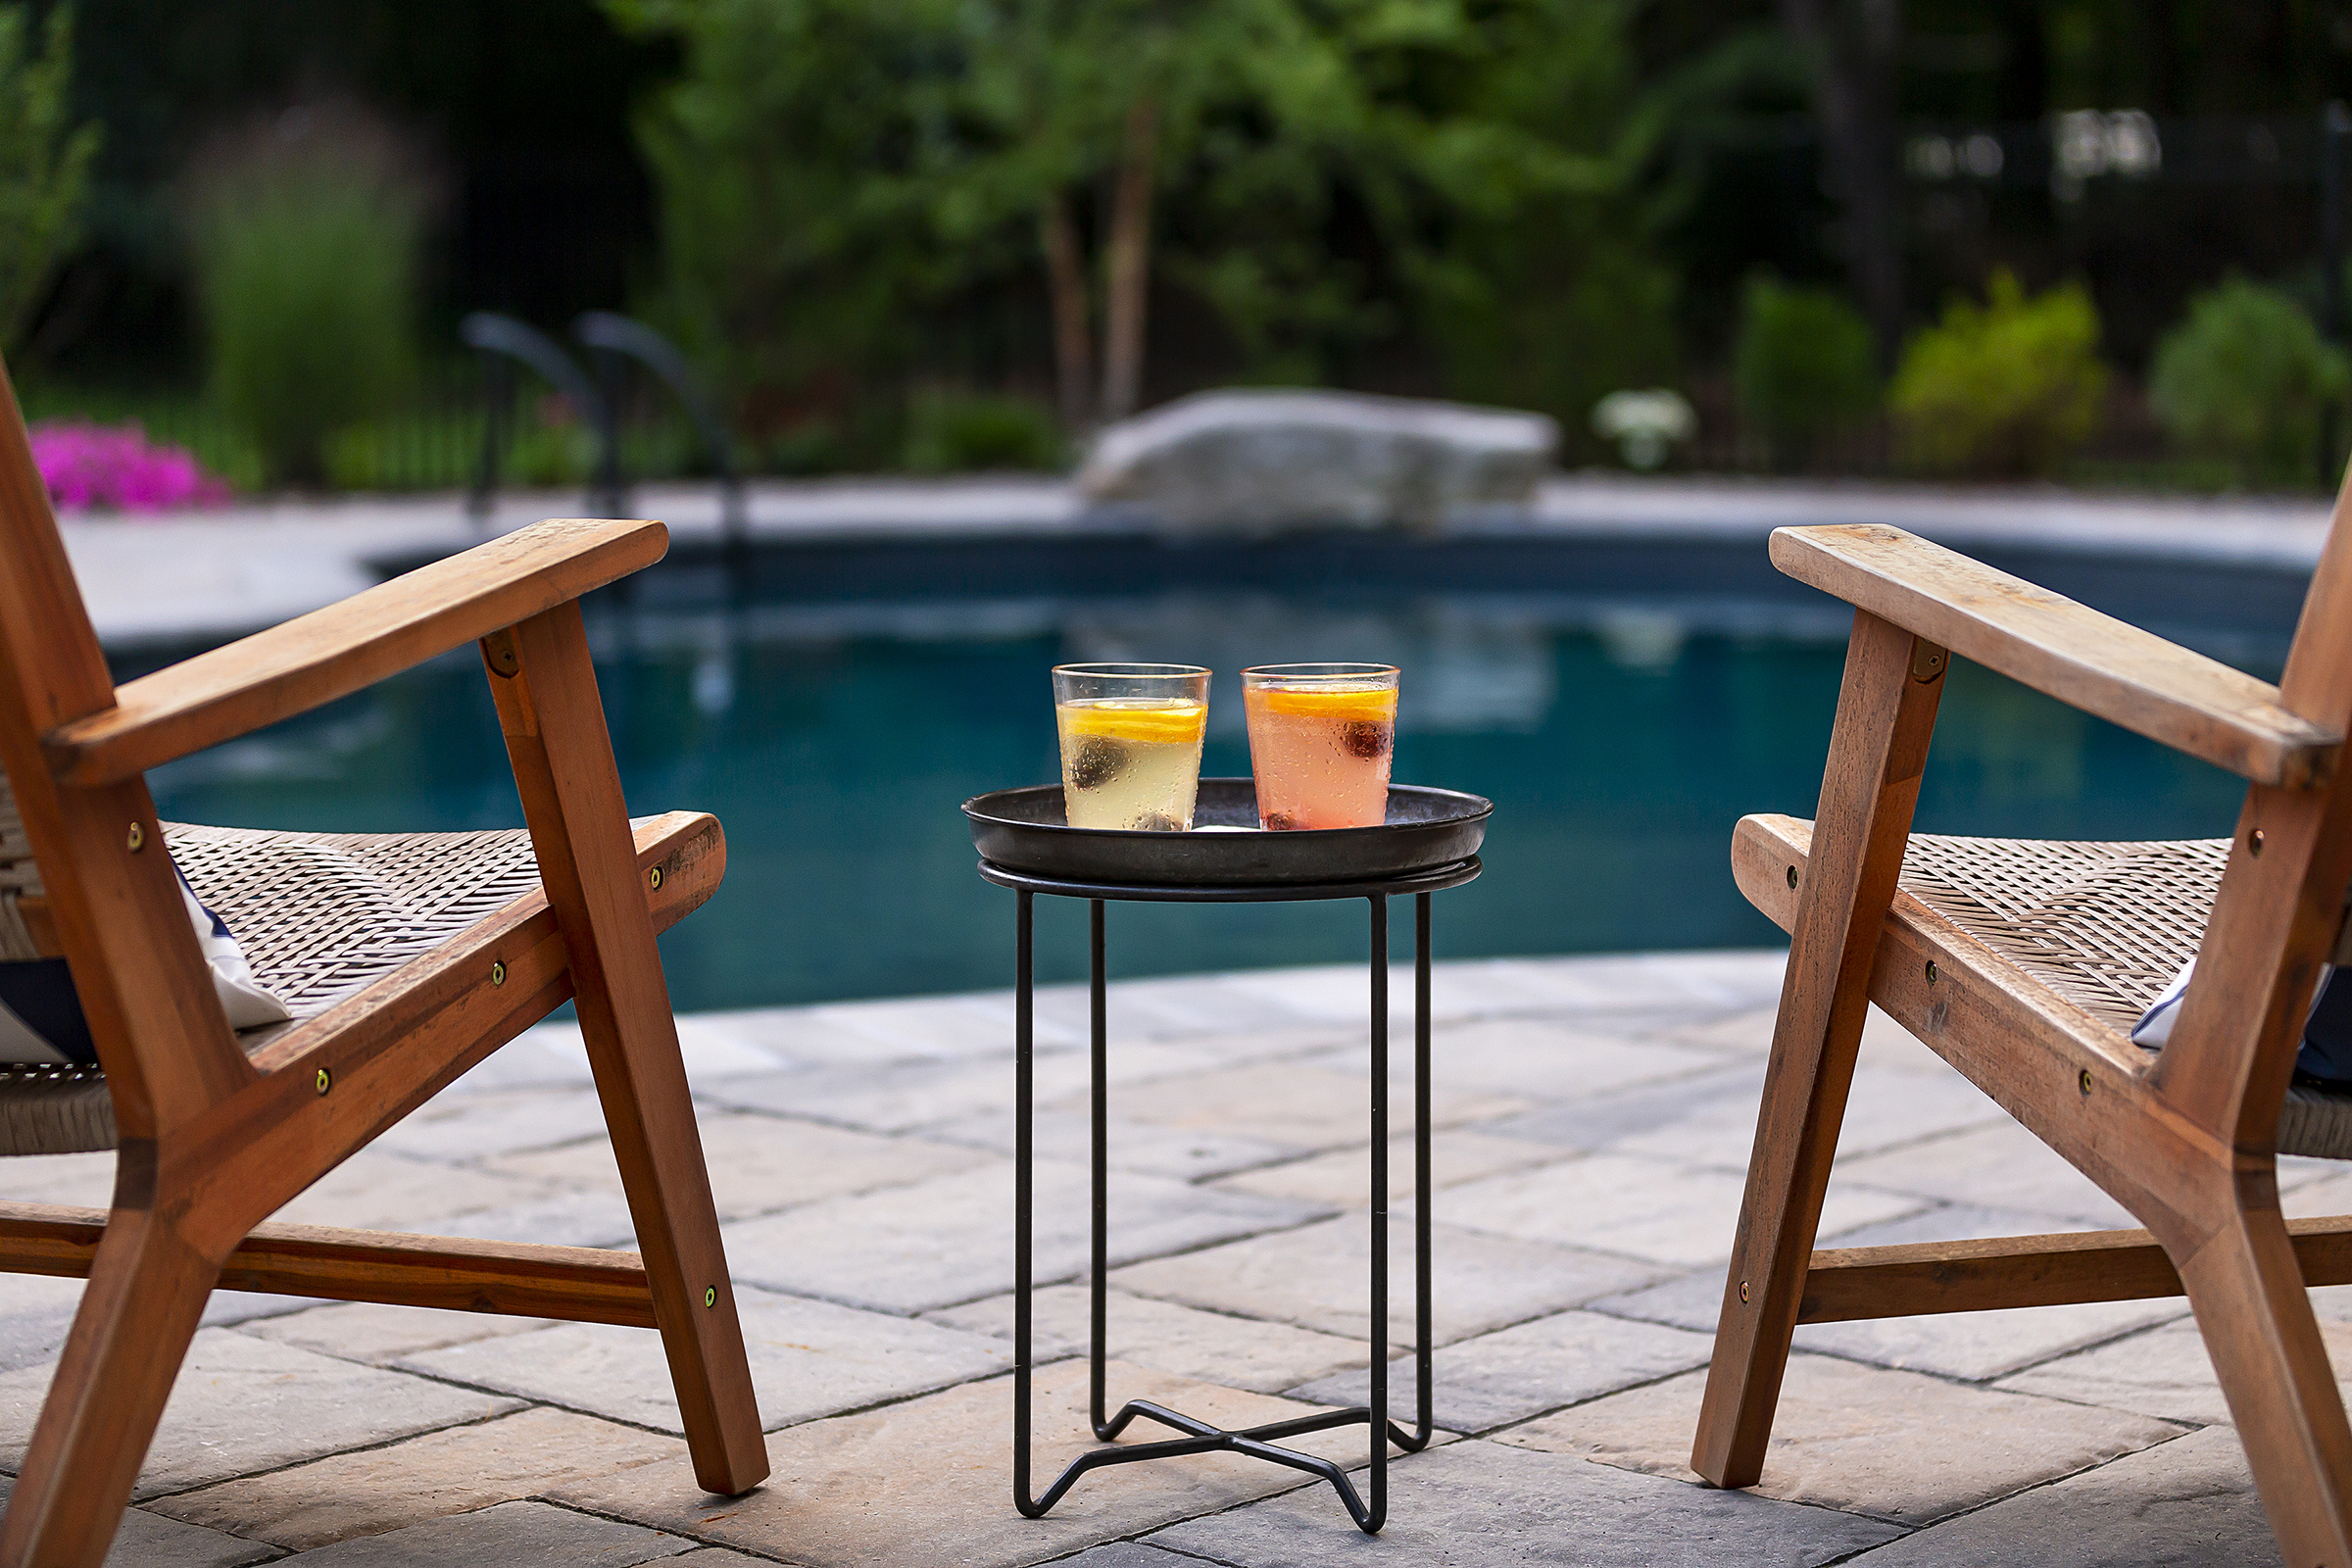 Pool chairs with drinks